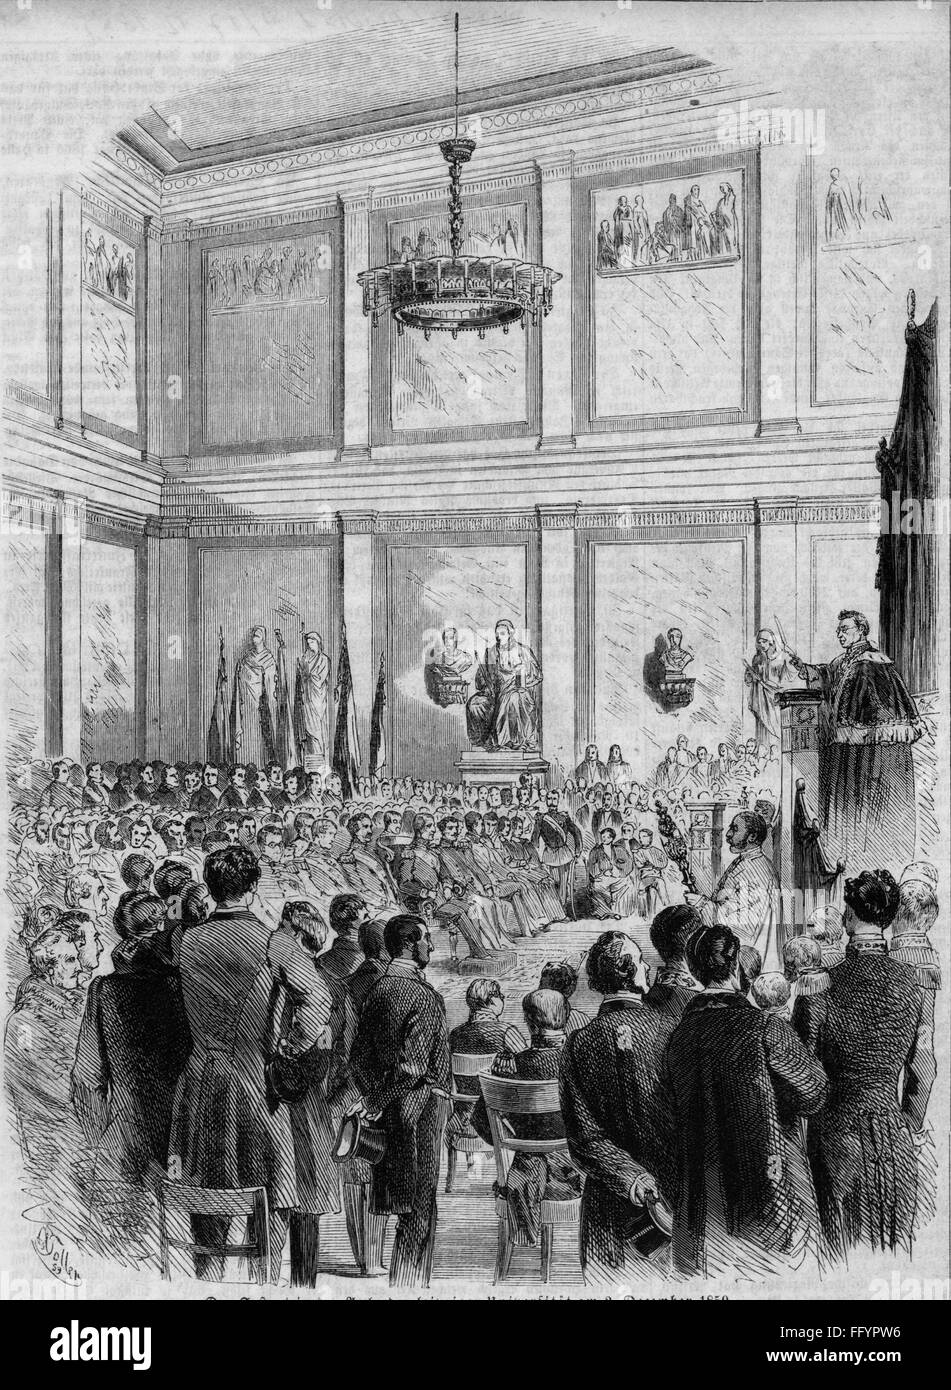 pedagogy,university,ceremonial act in the auditorium celebrating 450th anniversary of the Leipzig university,address by king Johann of Saxony,2.12.1859,wood engraving by Albert Toller(1825 - 1898),1859,19th century,graphic,graphics,Germany,Saxony,anniversary,anniversaries,ceremonial act,ceremonial acts,hall,halls,speaker's desk,speaker's desks,speech,speeches,speak,speaking,listener,listeners,hearer,hearers,audience,audiences,jubilation,celebrations,celebration,festival,festivals,pedagogy,paedagogy,education,auditorium,au,Additional-Rights-Clearences-Not Available Stock Photo